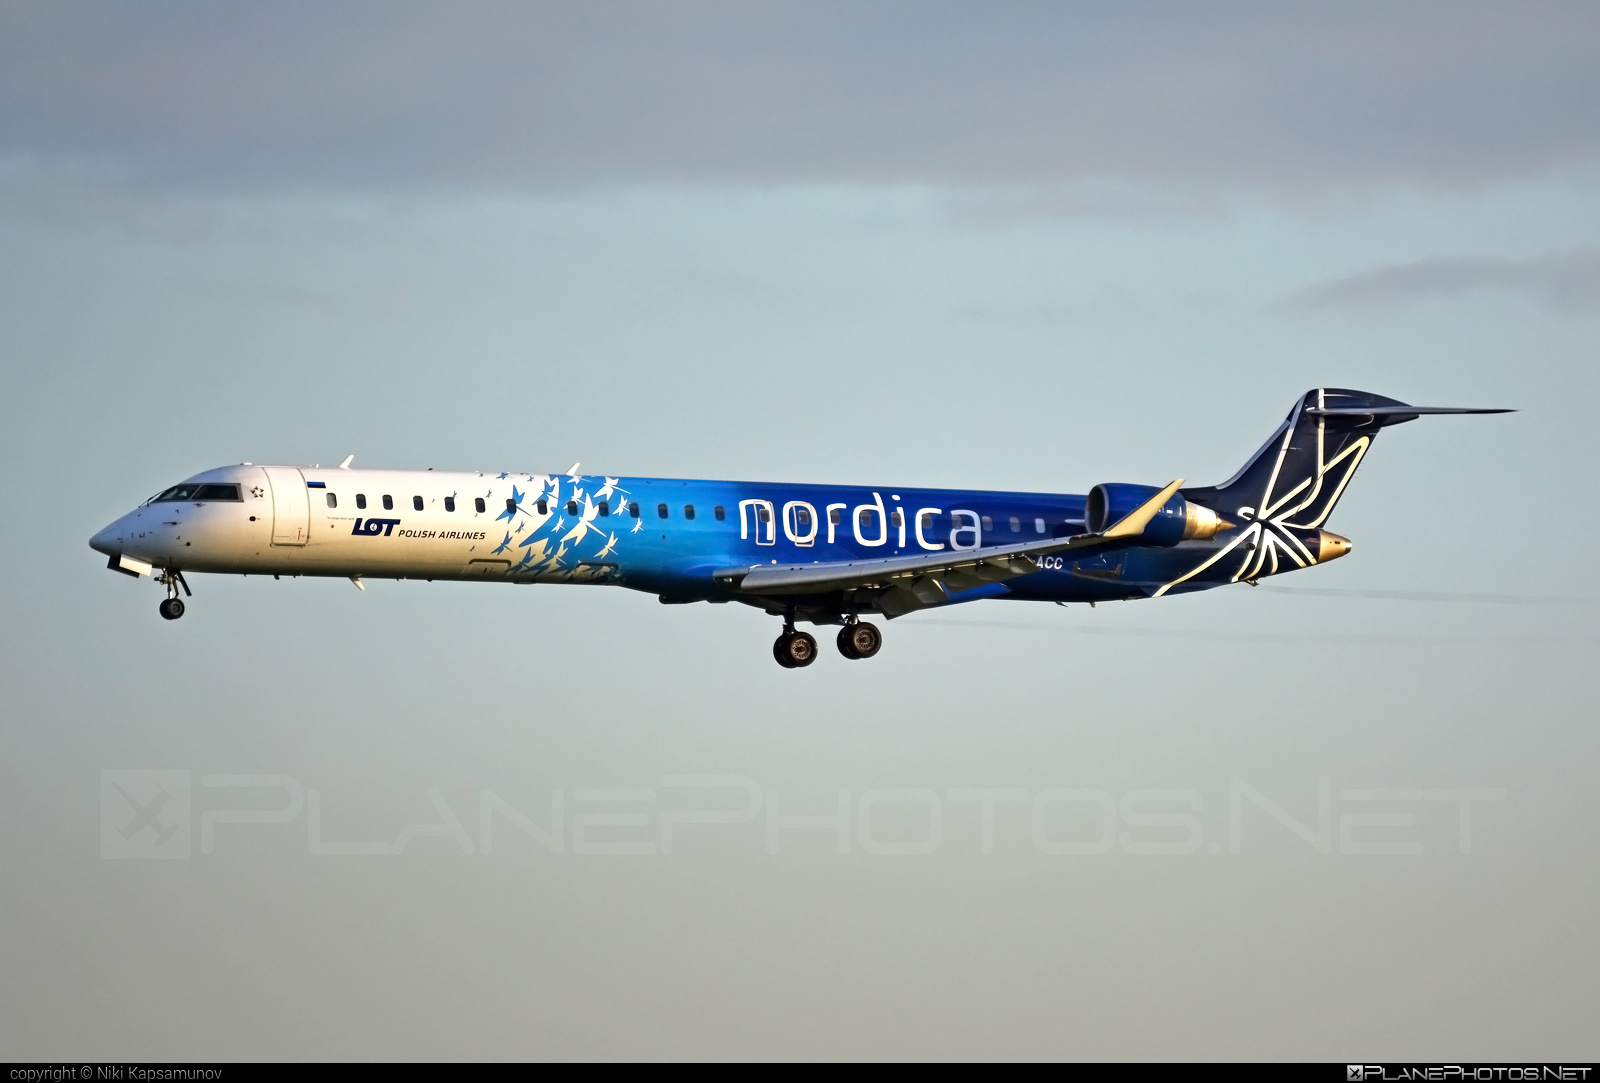 Bombardier CRJ900 - ES-ACC operated by Nordica #bombardier #crj900